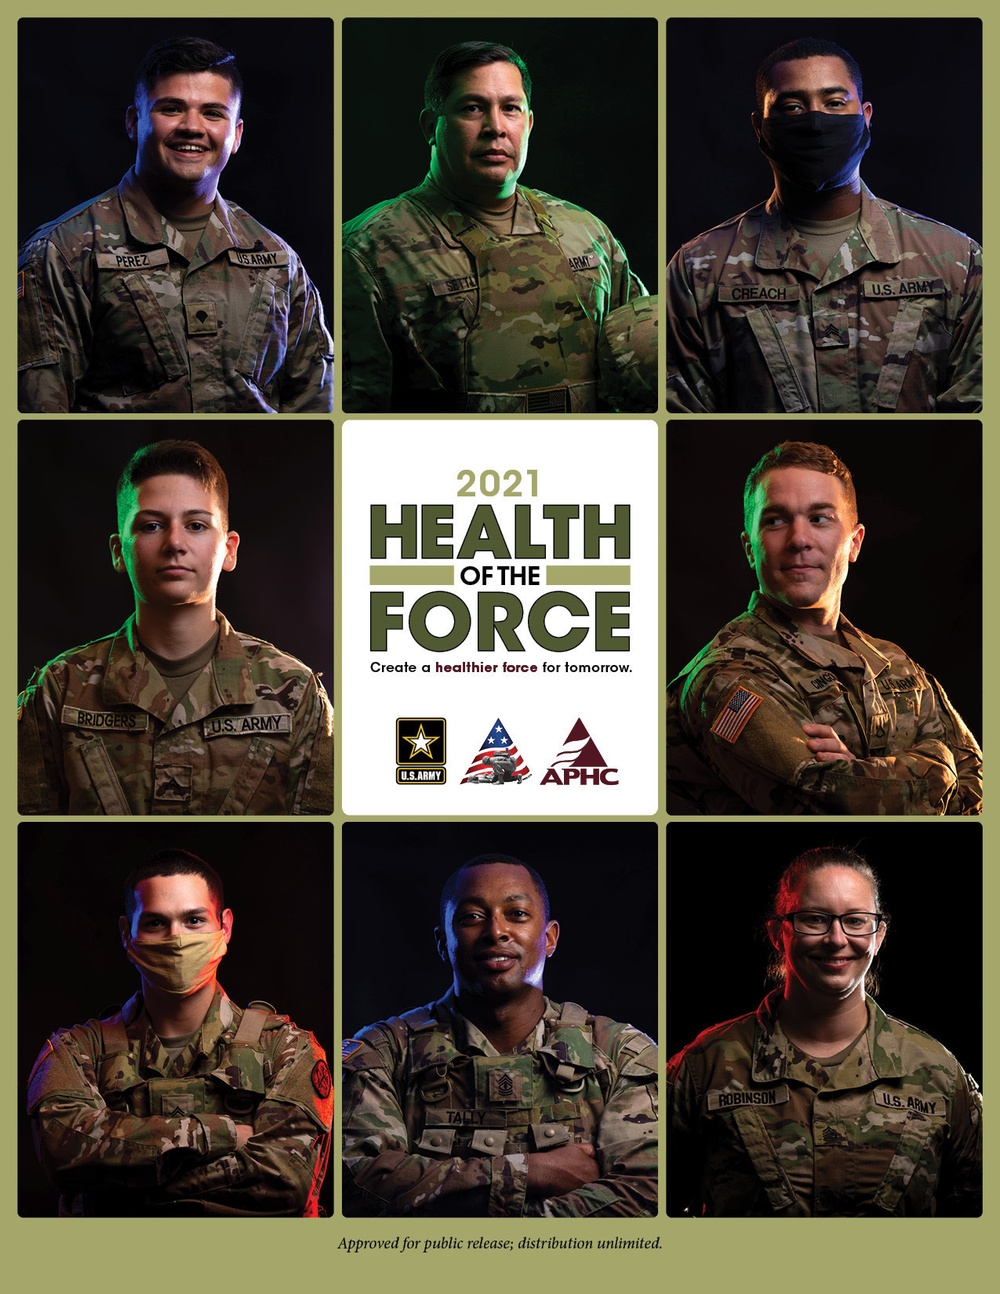 2021 Health of the Force report examines COVID-19 pandemic impacts to Soldier health, public health response